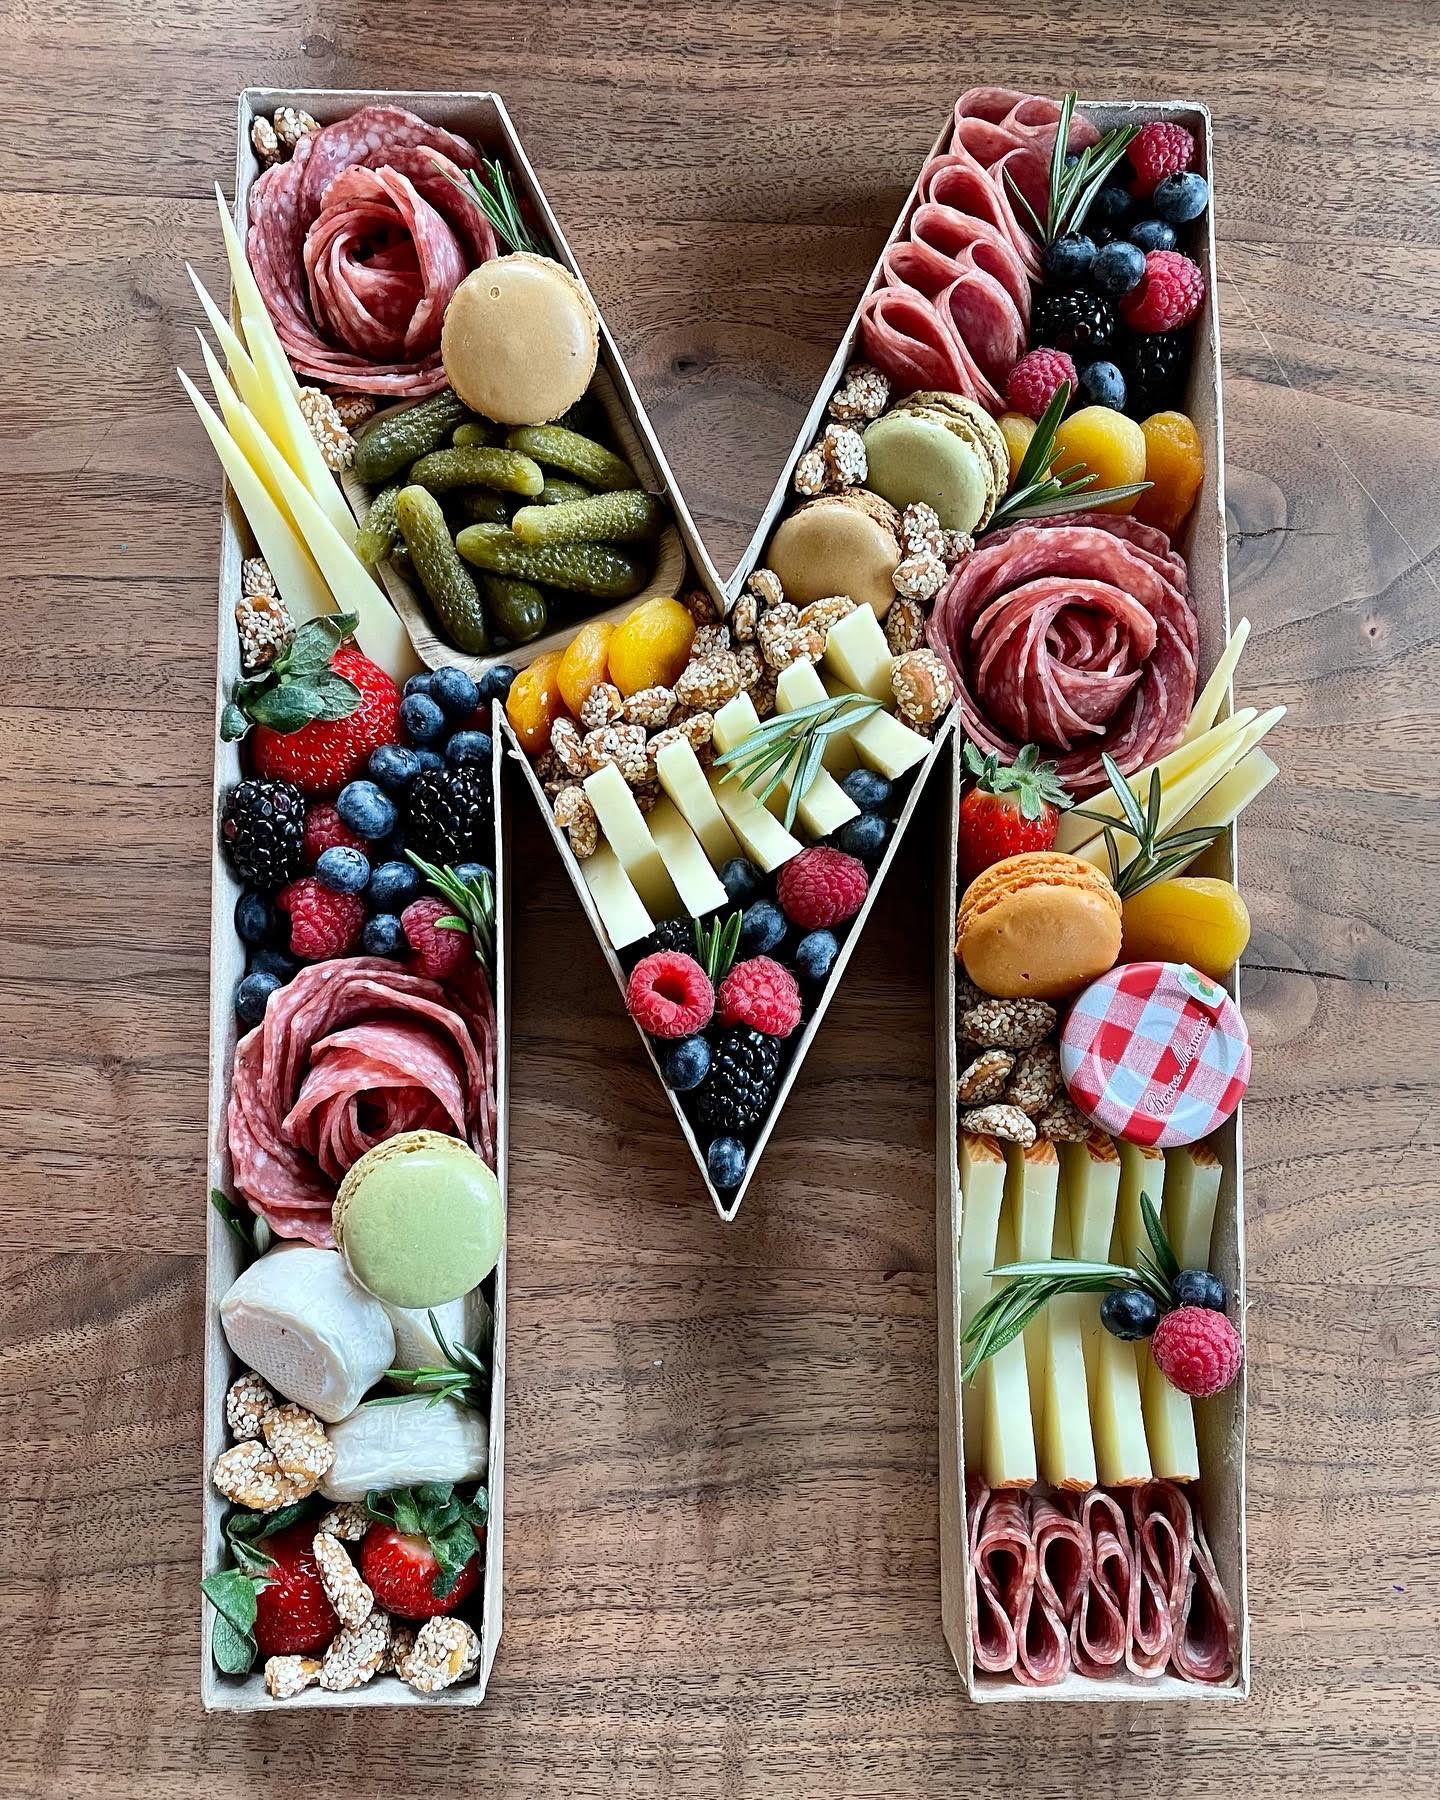  Number Charcuterie Board Box